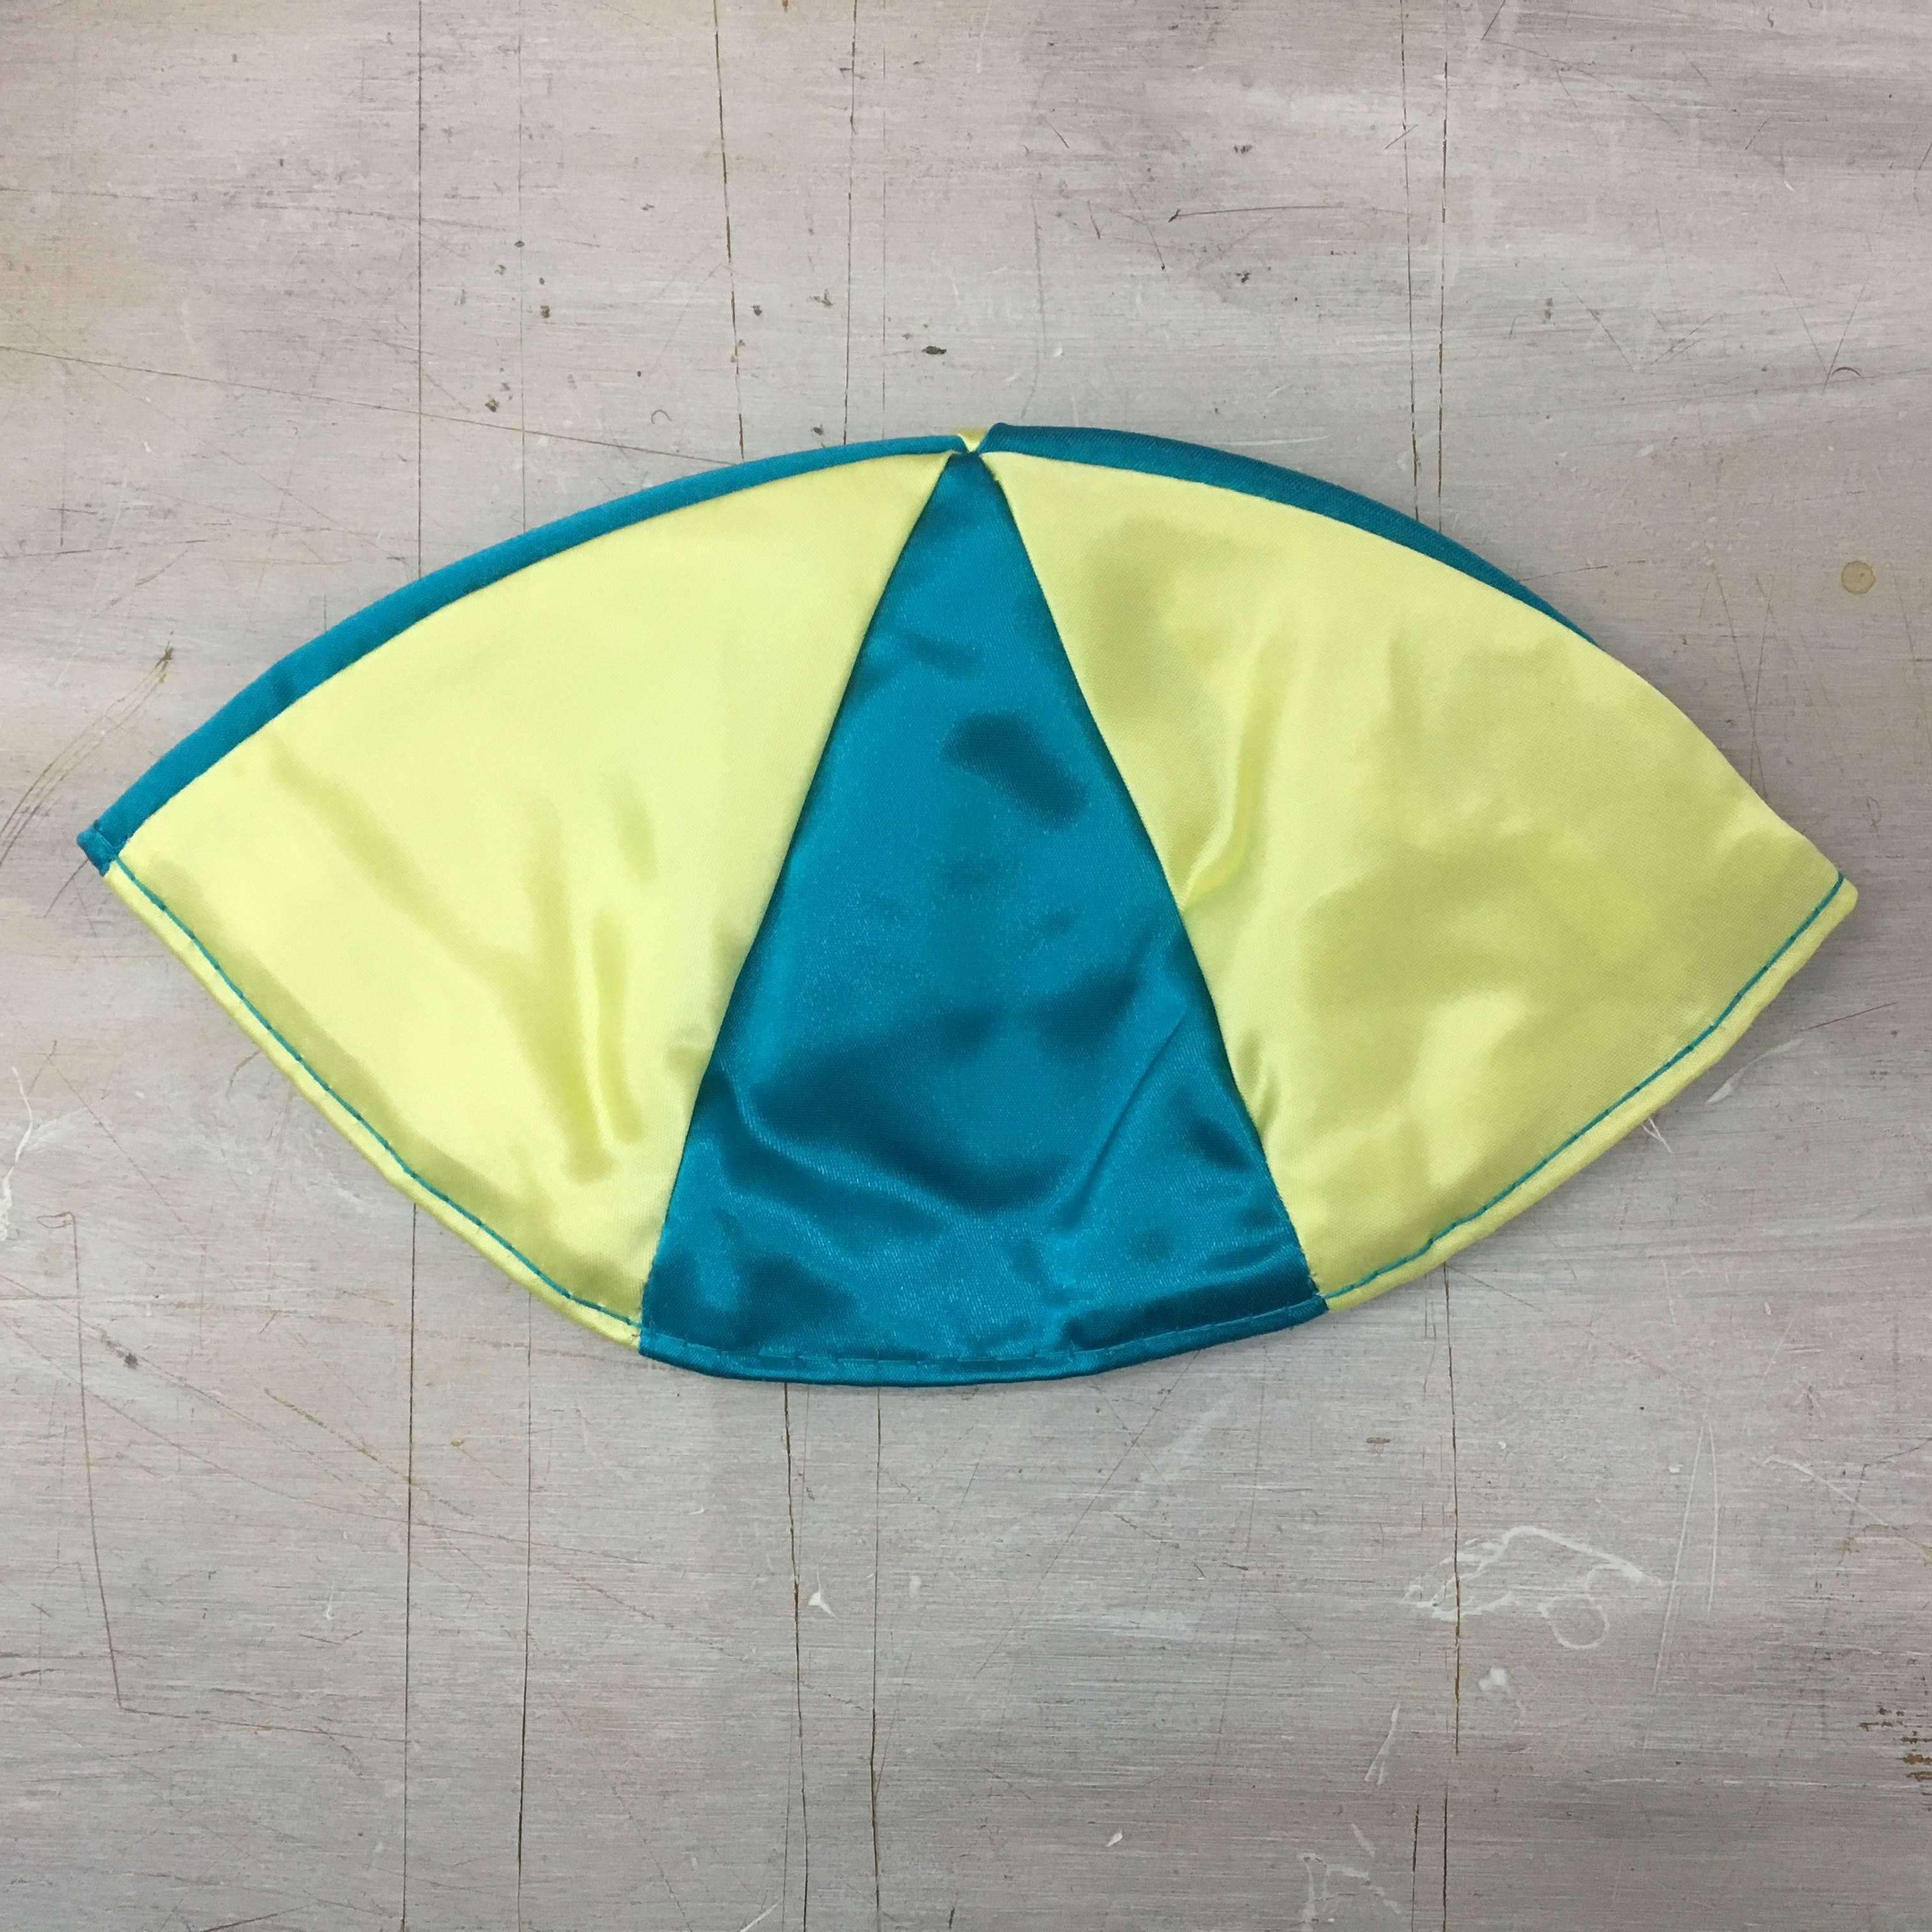 Swedish Yarmulke (Please Don't Forget Raoul Wallenberg),1995
Satin yarmulke - Blue and Yellow
Signed
For decades, Leibowitz has been the New York art world’s master painter of abjection and neuroses, with mockingly self-abasing work that mixes